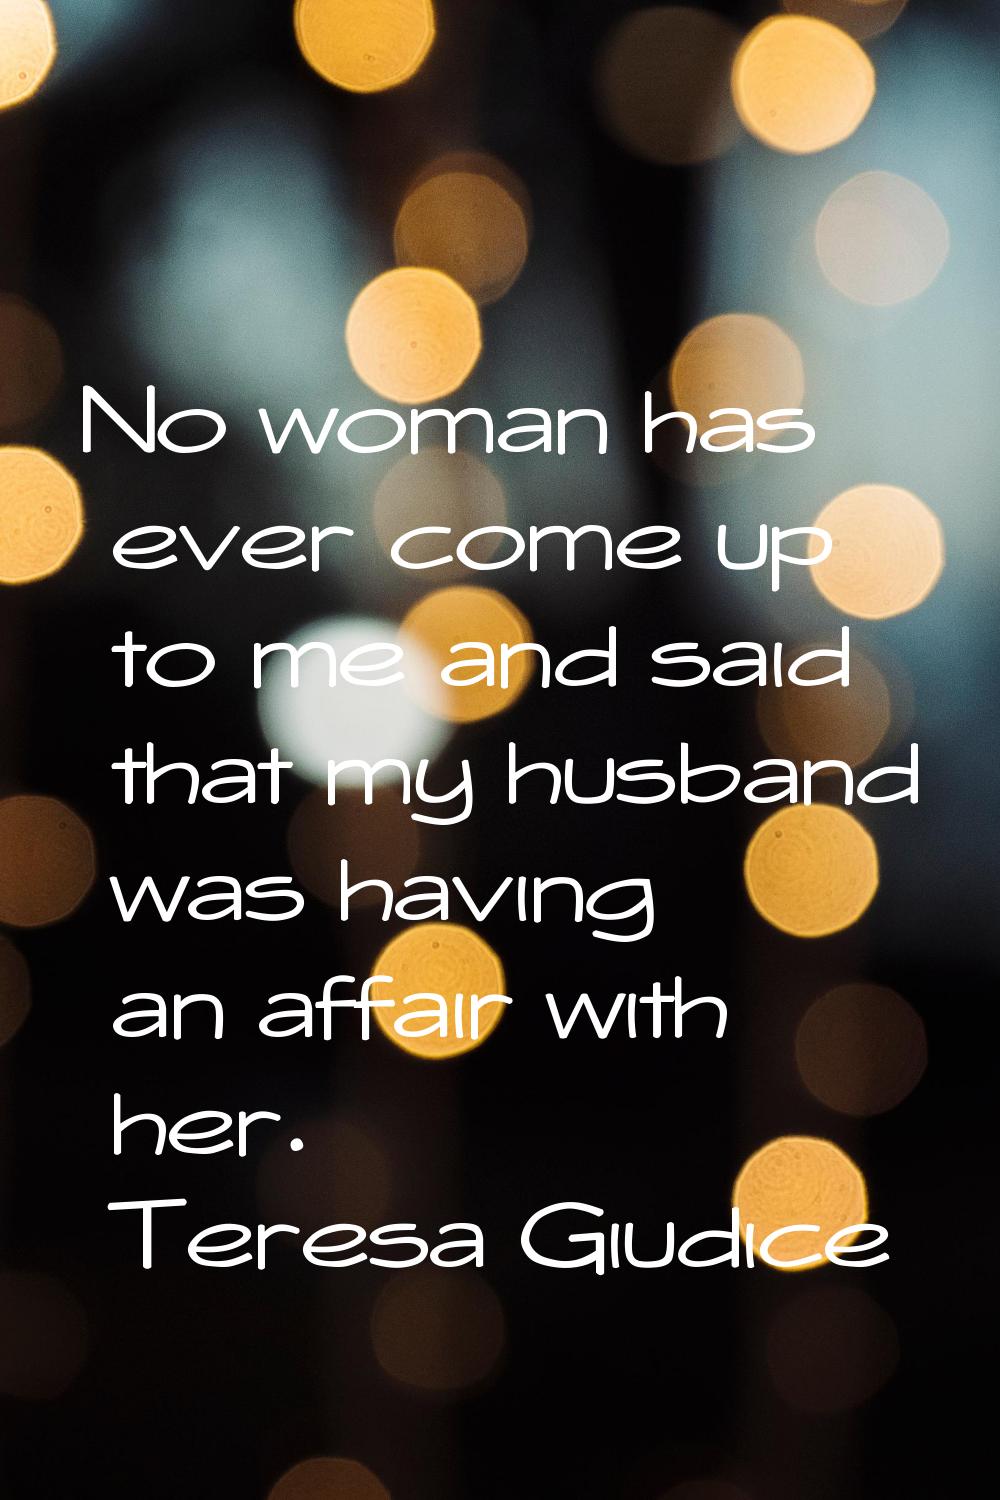 No woman has ever come up to me and said that my husband was having an affair with her.